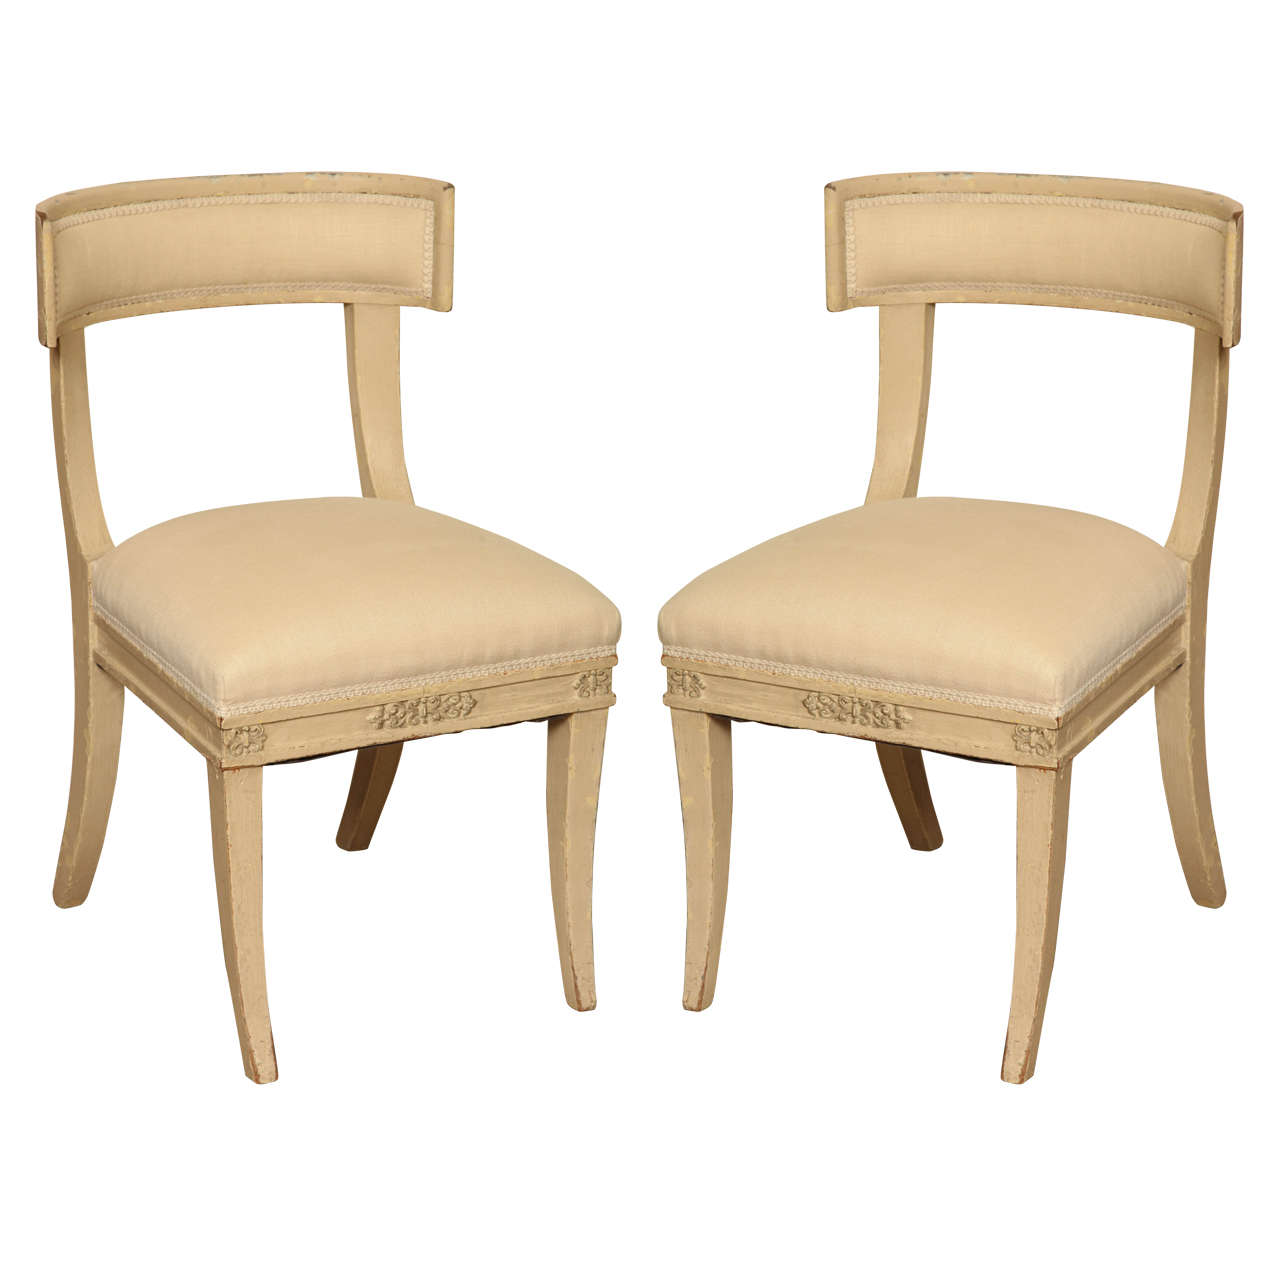 Pair of Painted Klismos Side Chairs, circa 1940 For Sale